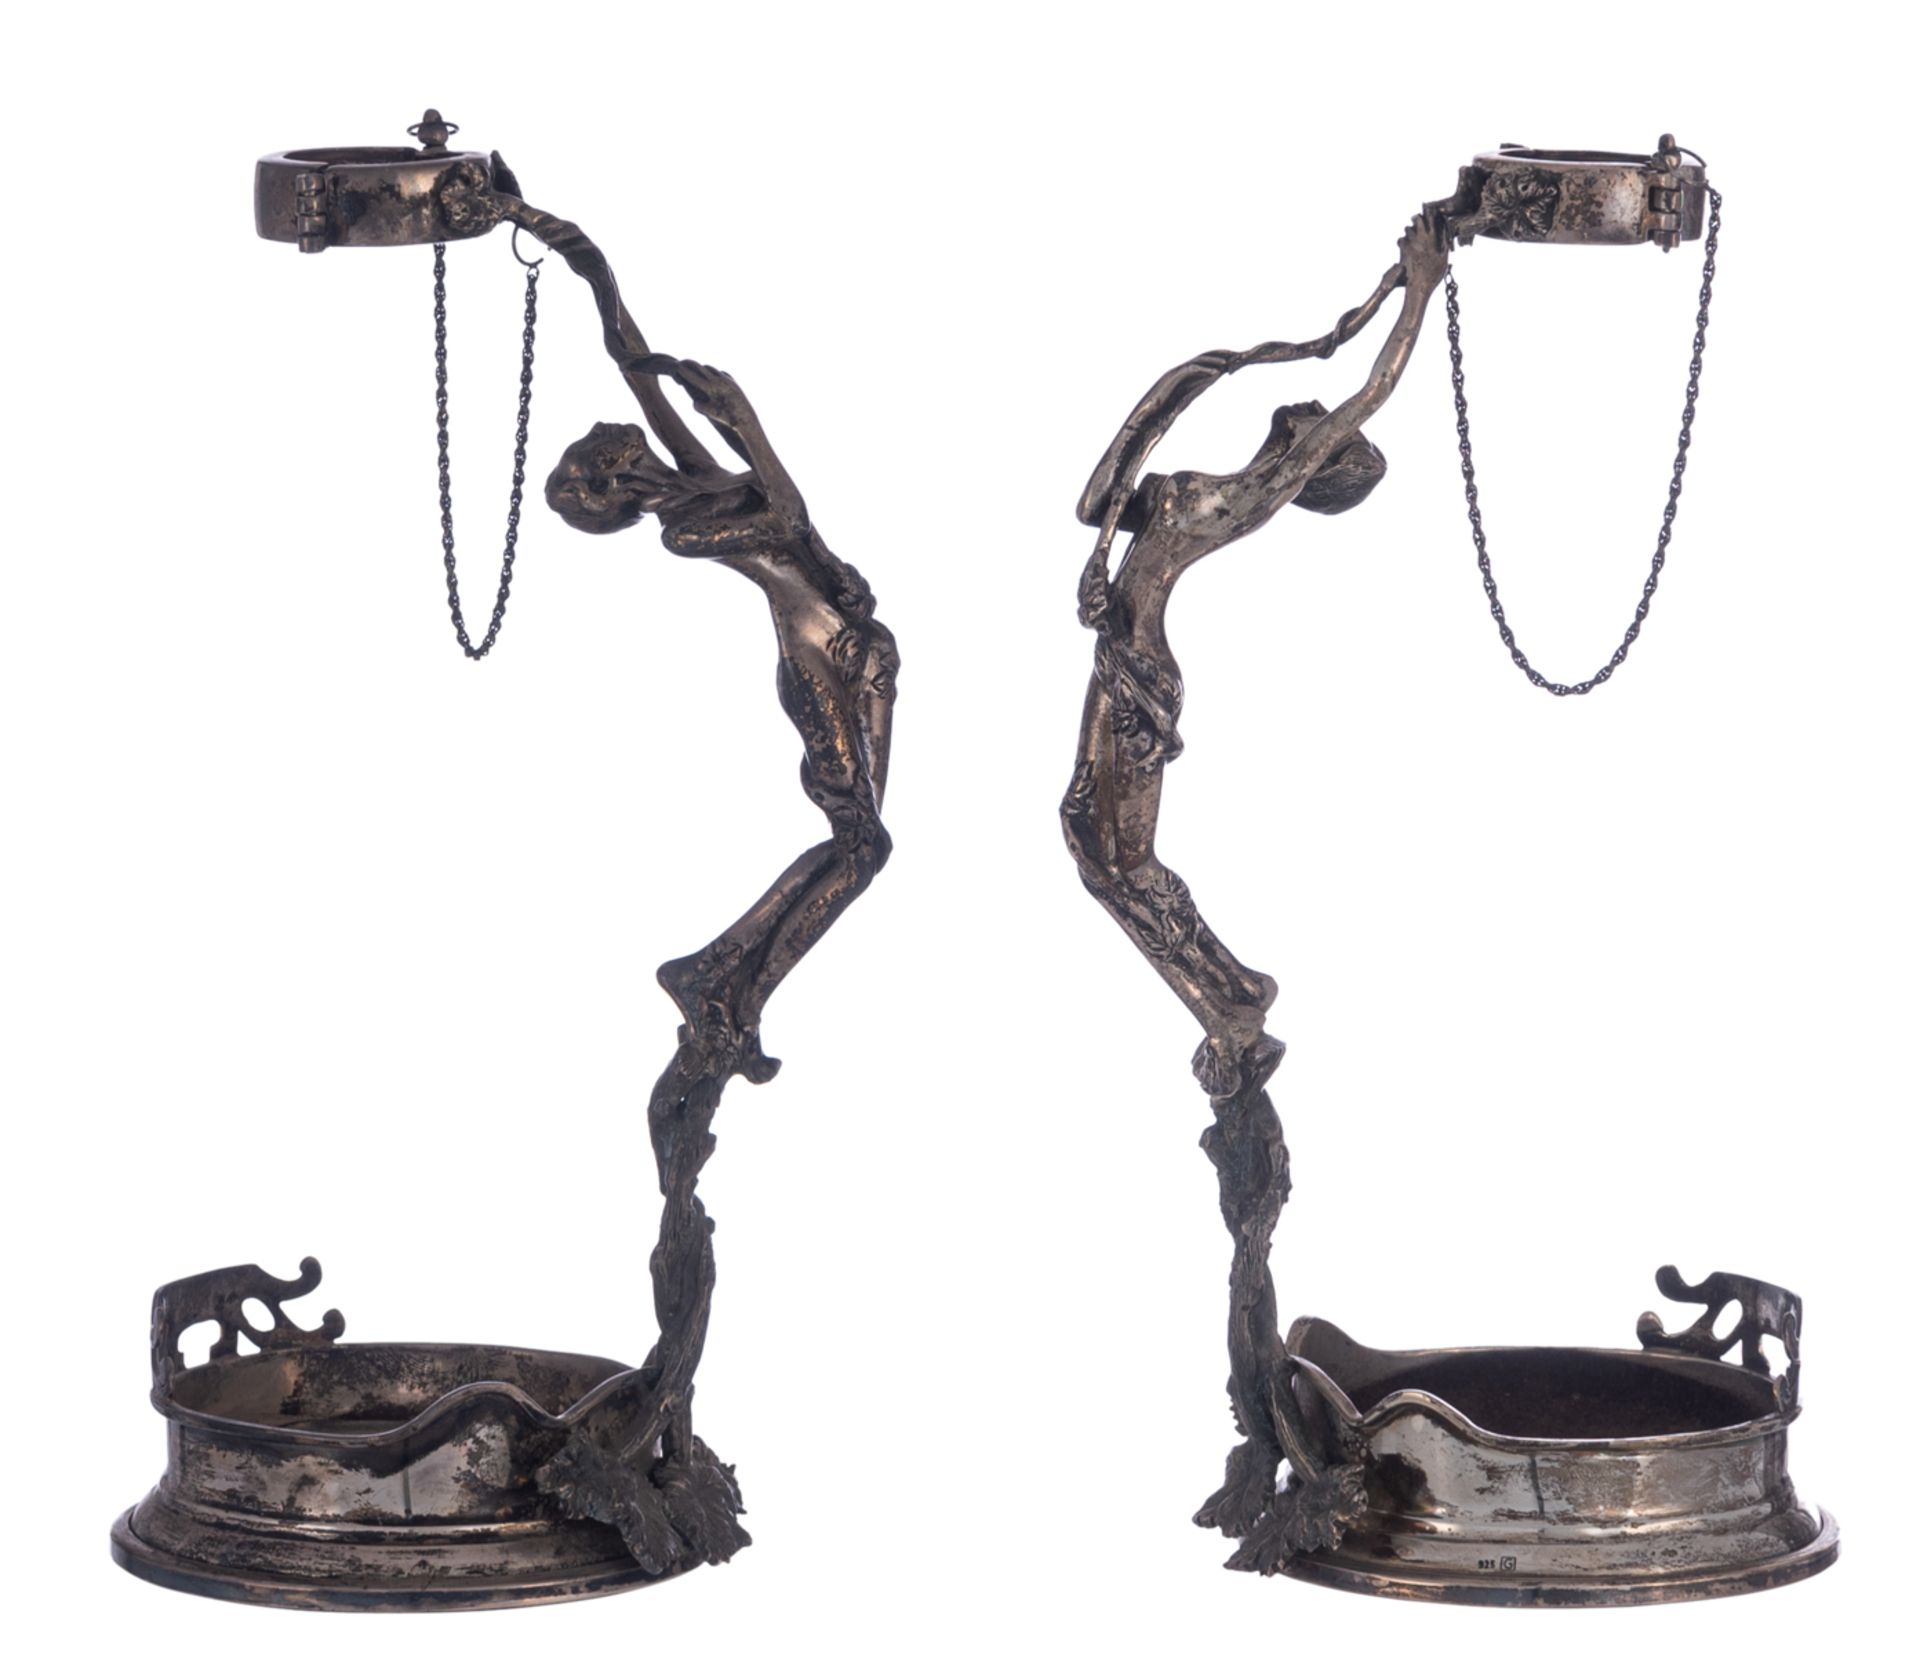 A pair of 925/000 silver wine bottle holders, both shaped as nymphs holding the bottleneck, probably